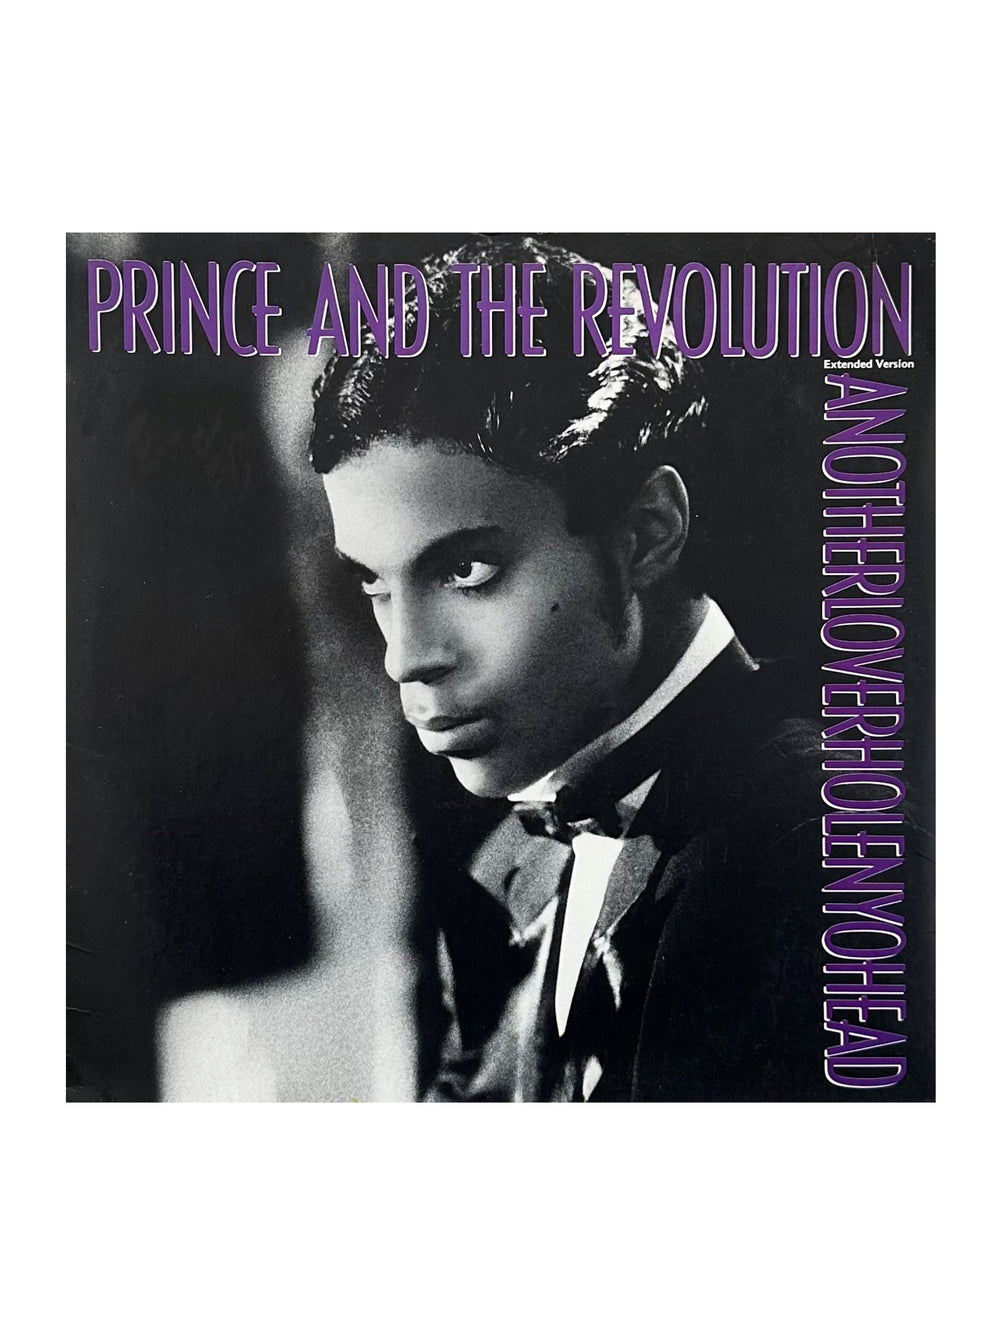 Prince – & The Revolution ANOTHERLOVER...Vinyl 12" Single US Preloved & Play Tested: 1986